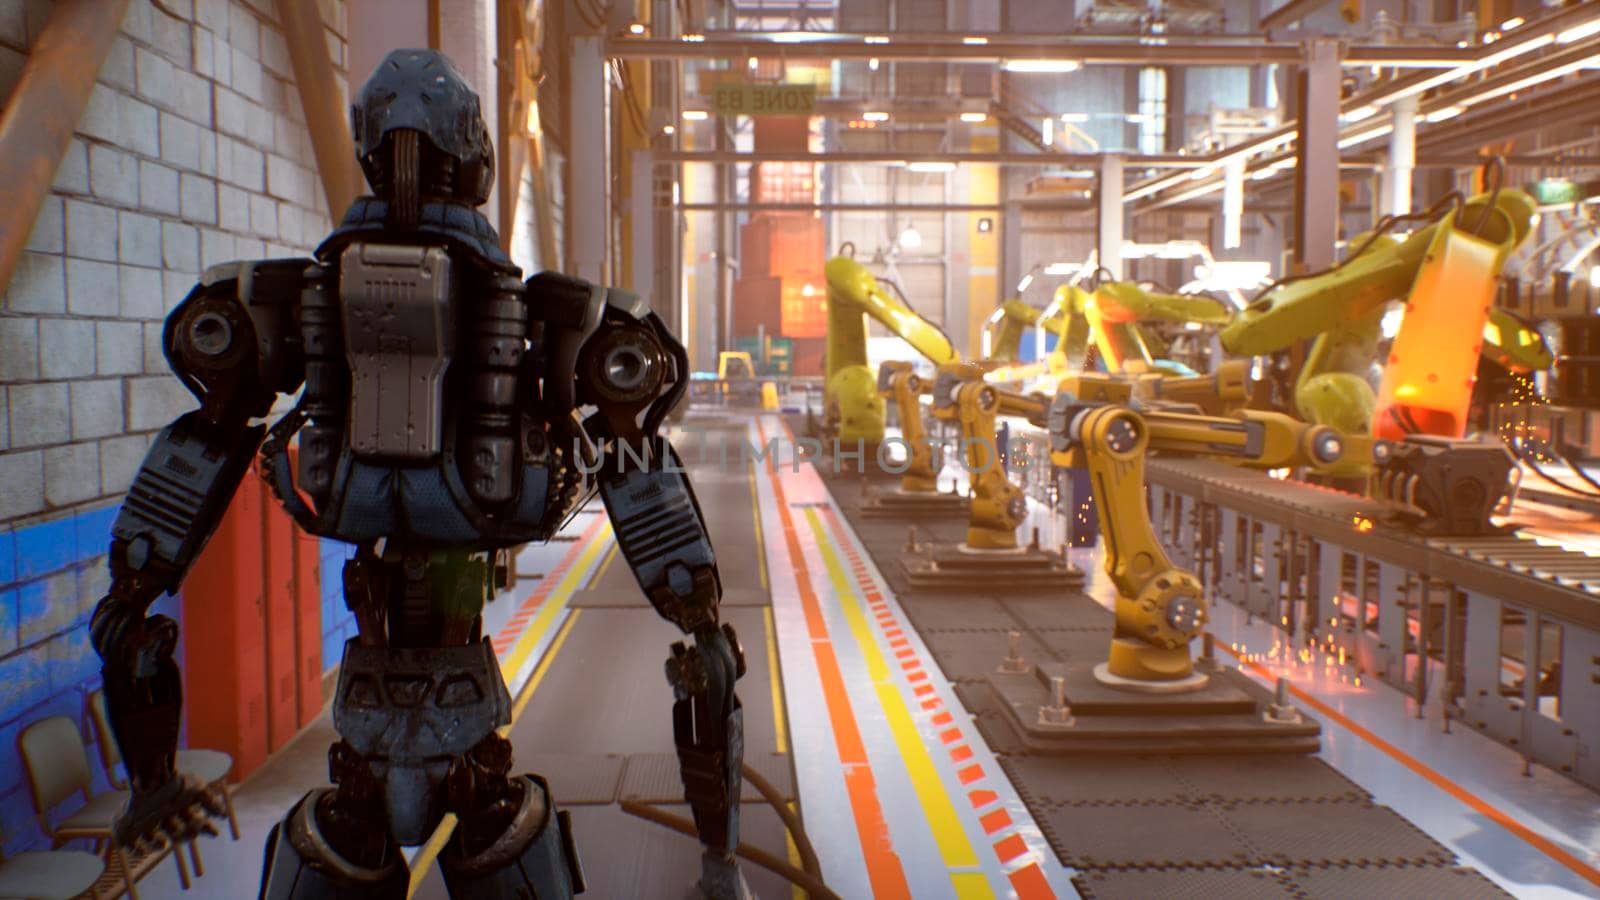 A futuristic robot checks an automatic production line in a car factory. 3D Rendering. by designprojects